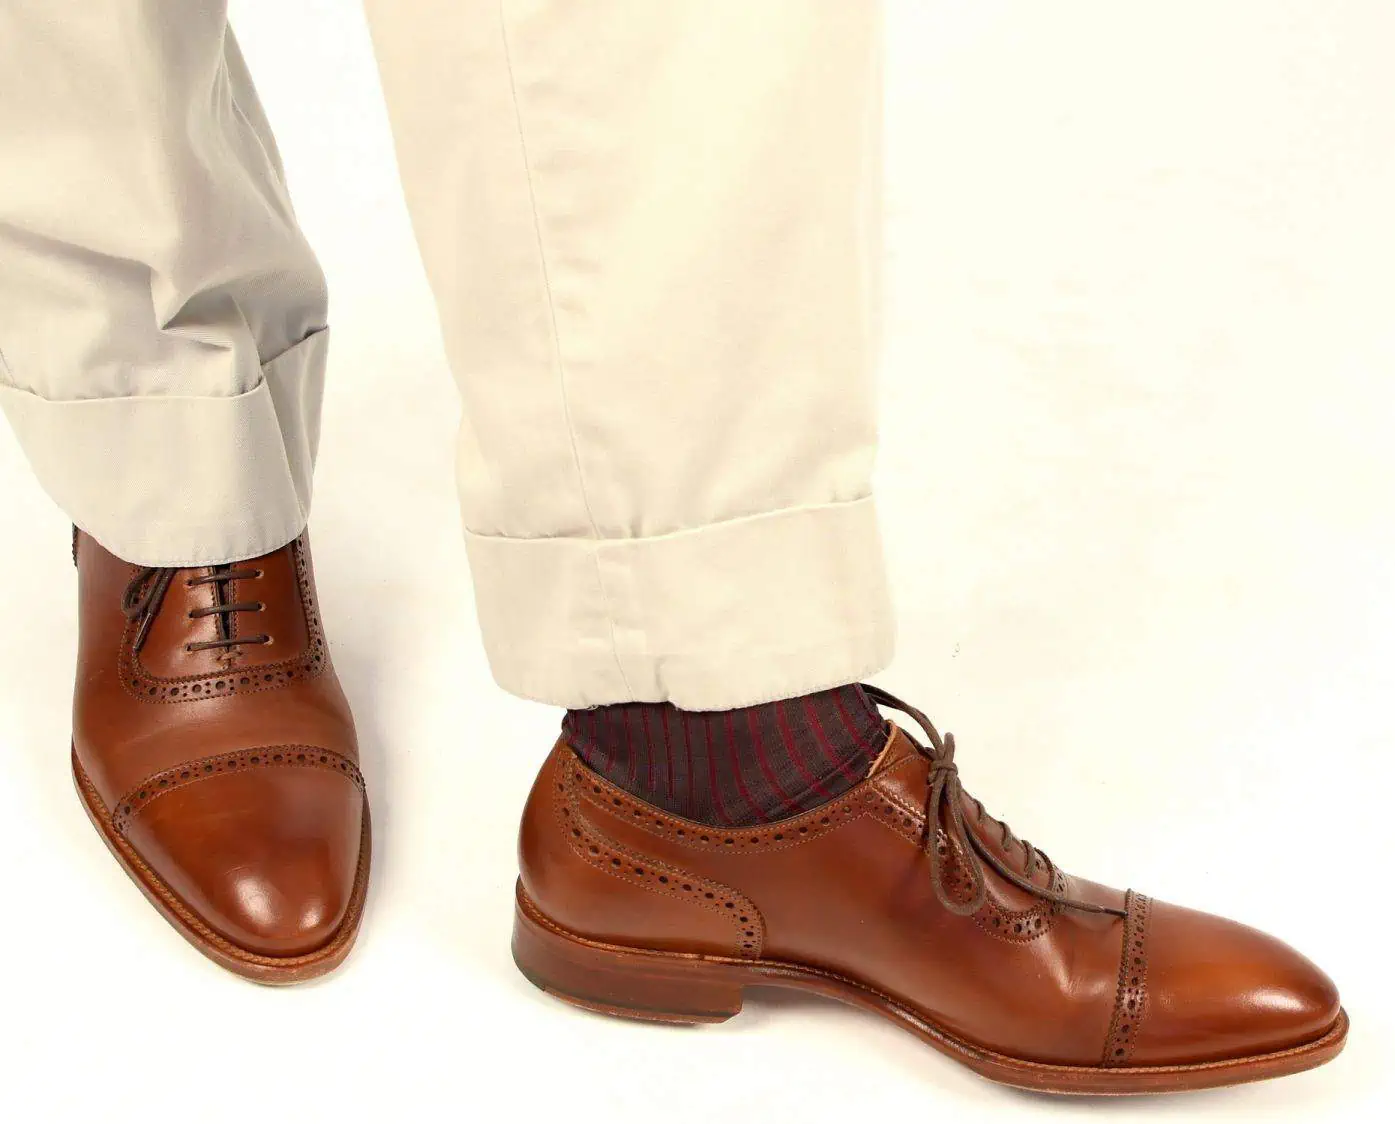 The Art of Coordination: Should Socks Match Pants, Shoes, Suits, or Ti